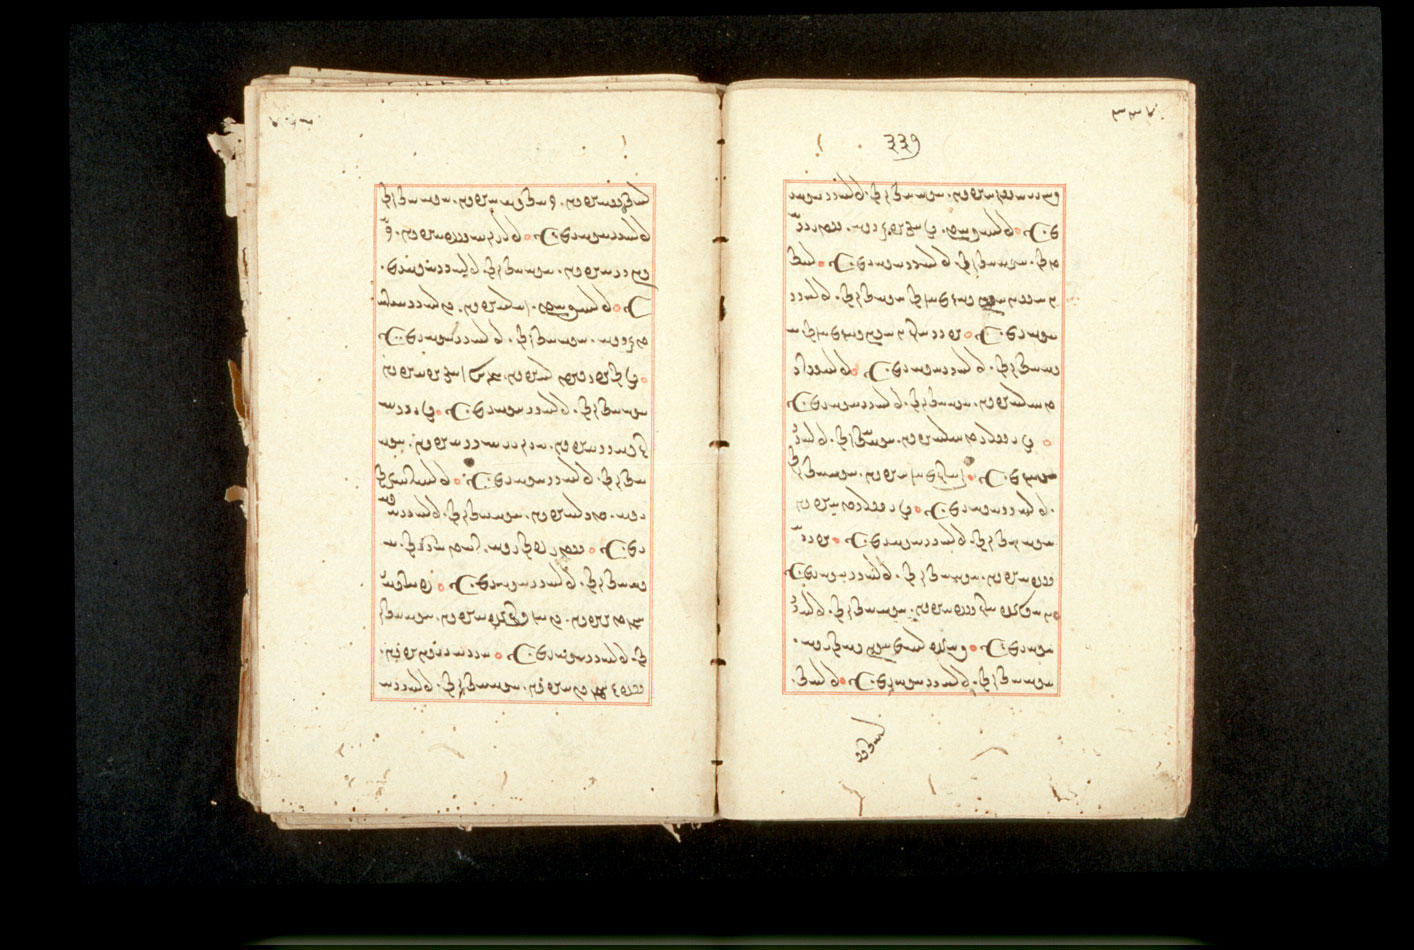 Folios 337v (right) and 338r (left)